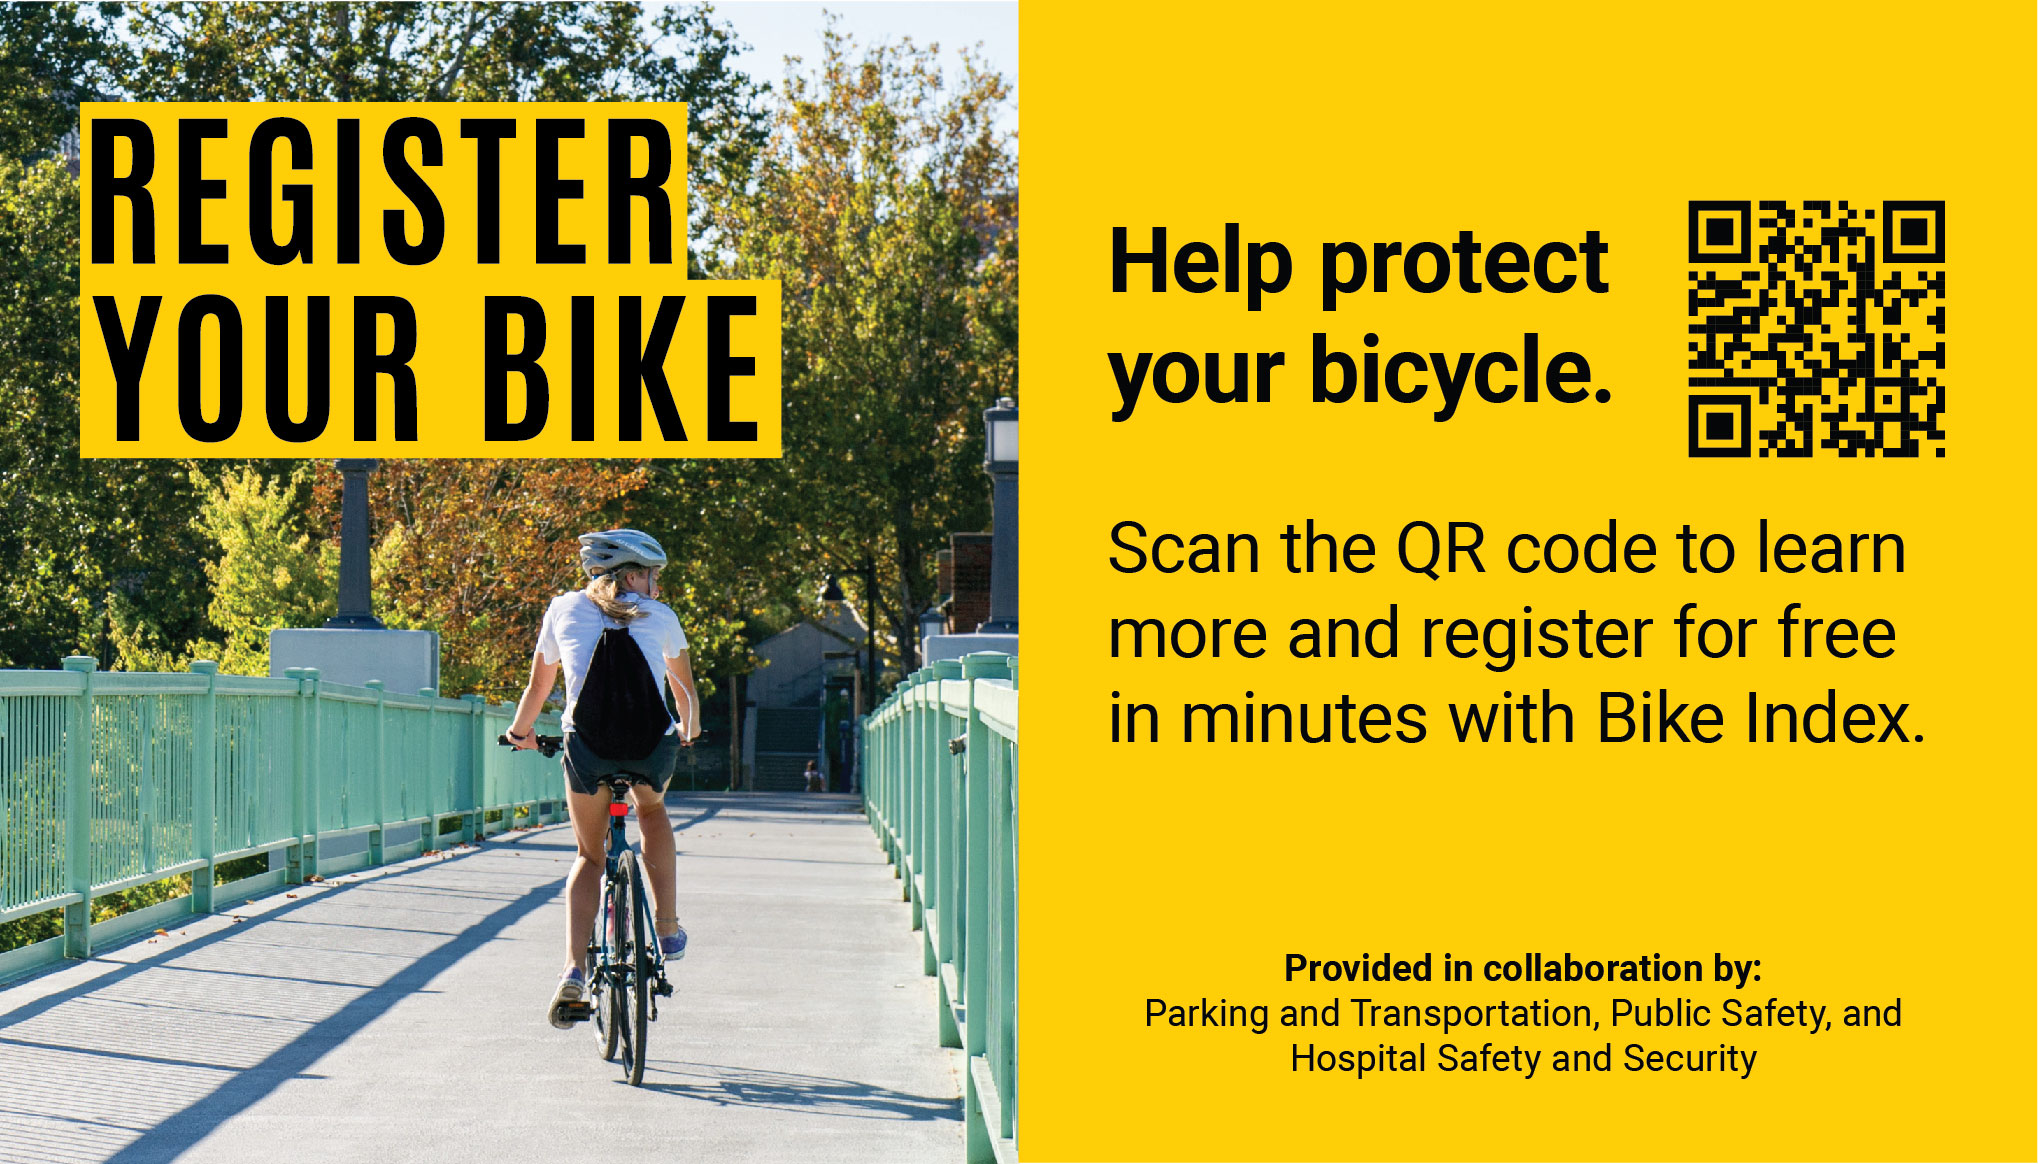 Register Your Bike. Help protect your bicycle. Scan the QR code to learn more and register for free in minutes with Bike Index.